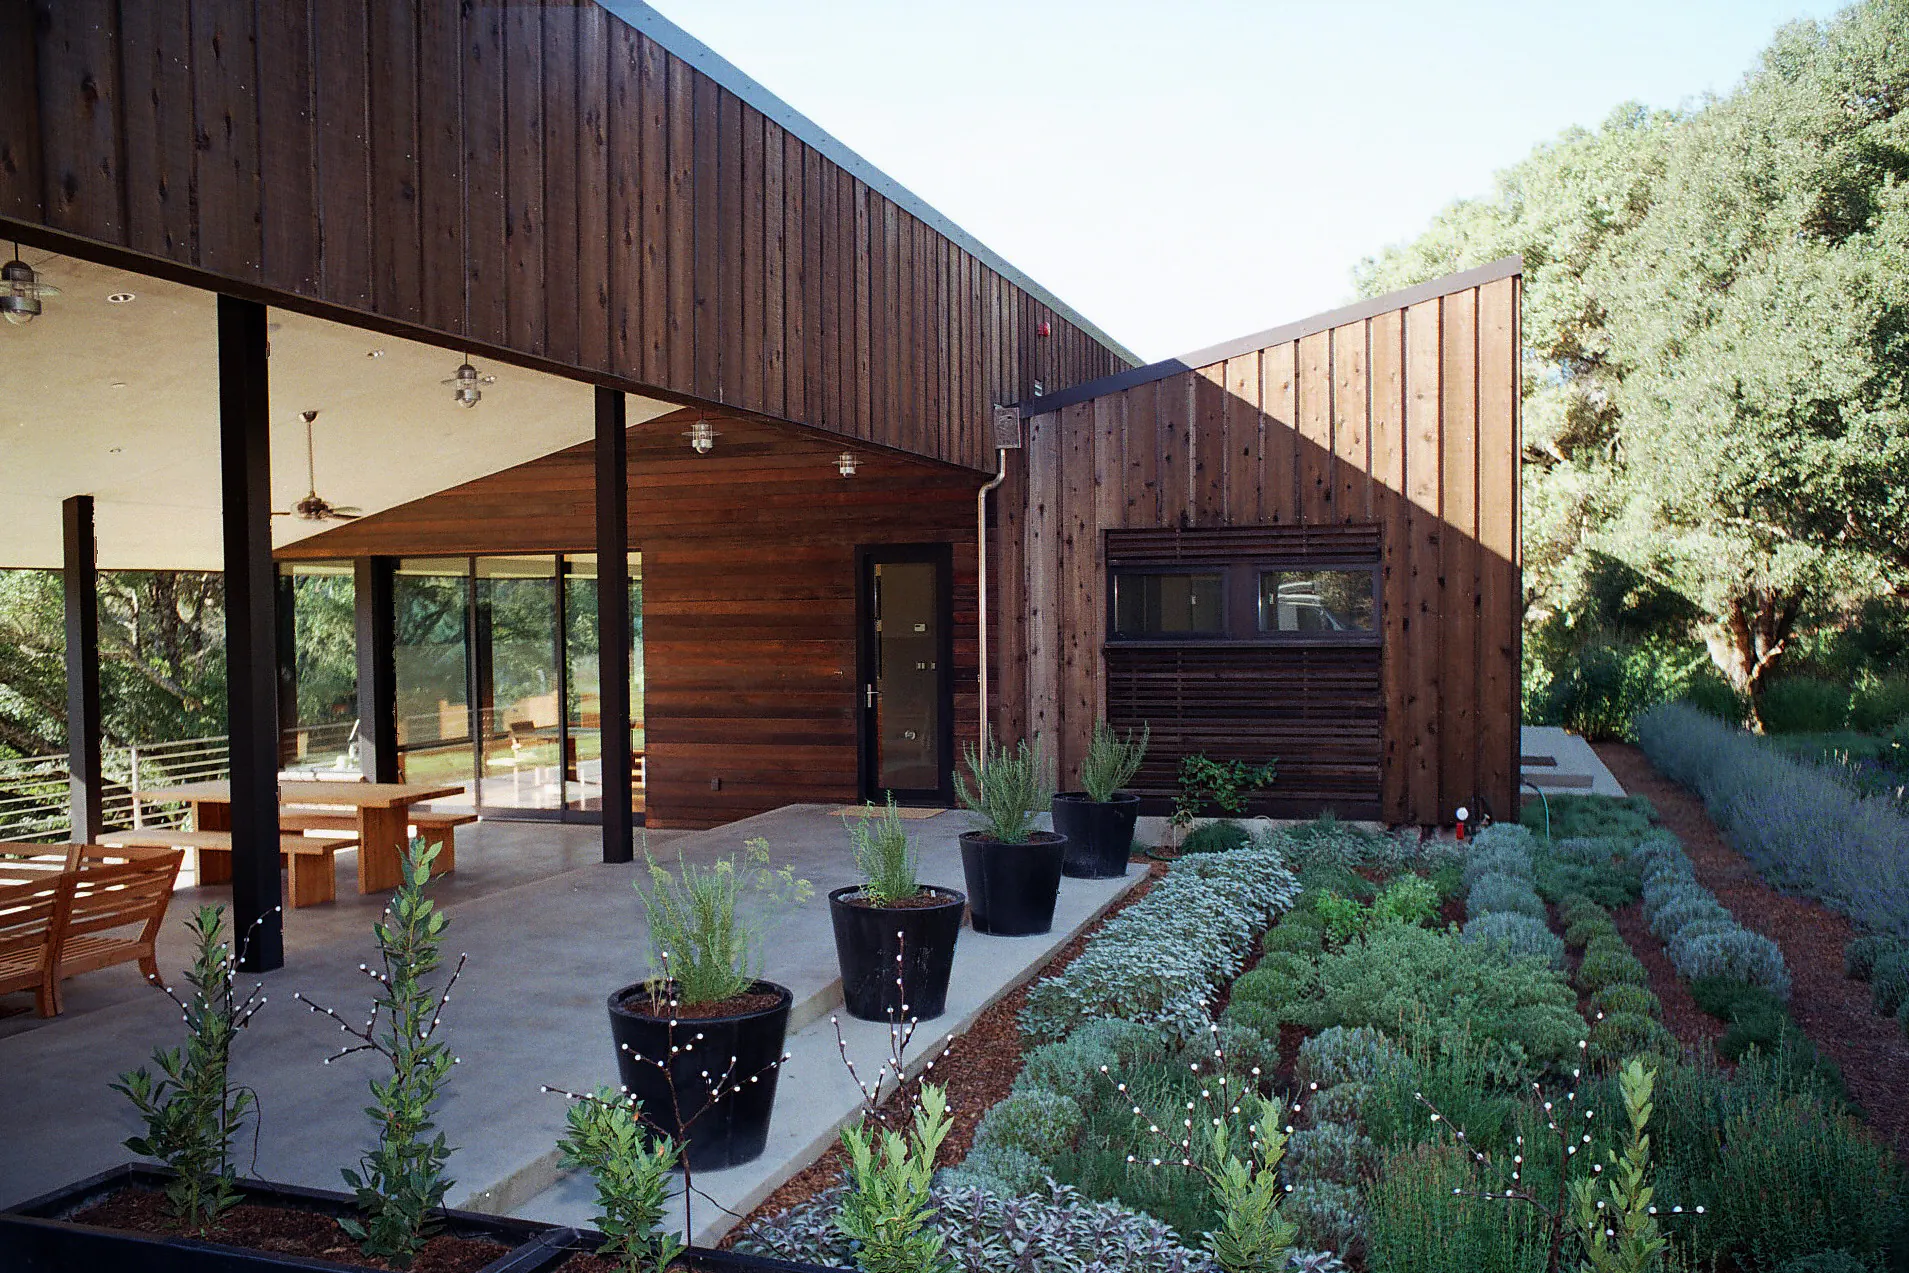 Photo of Barstow/Ensign Residence; architect, Regan Bice and Assoc., Berkeley, CA; exterior landscaping